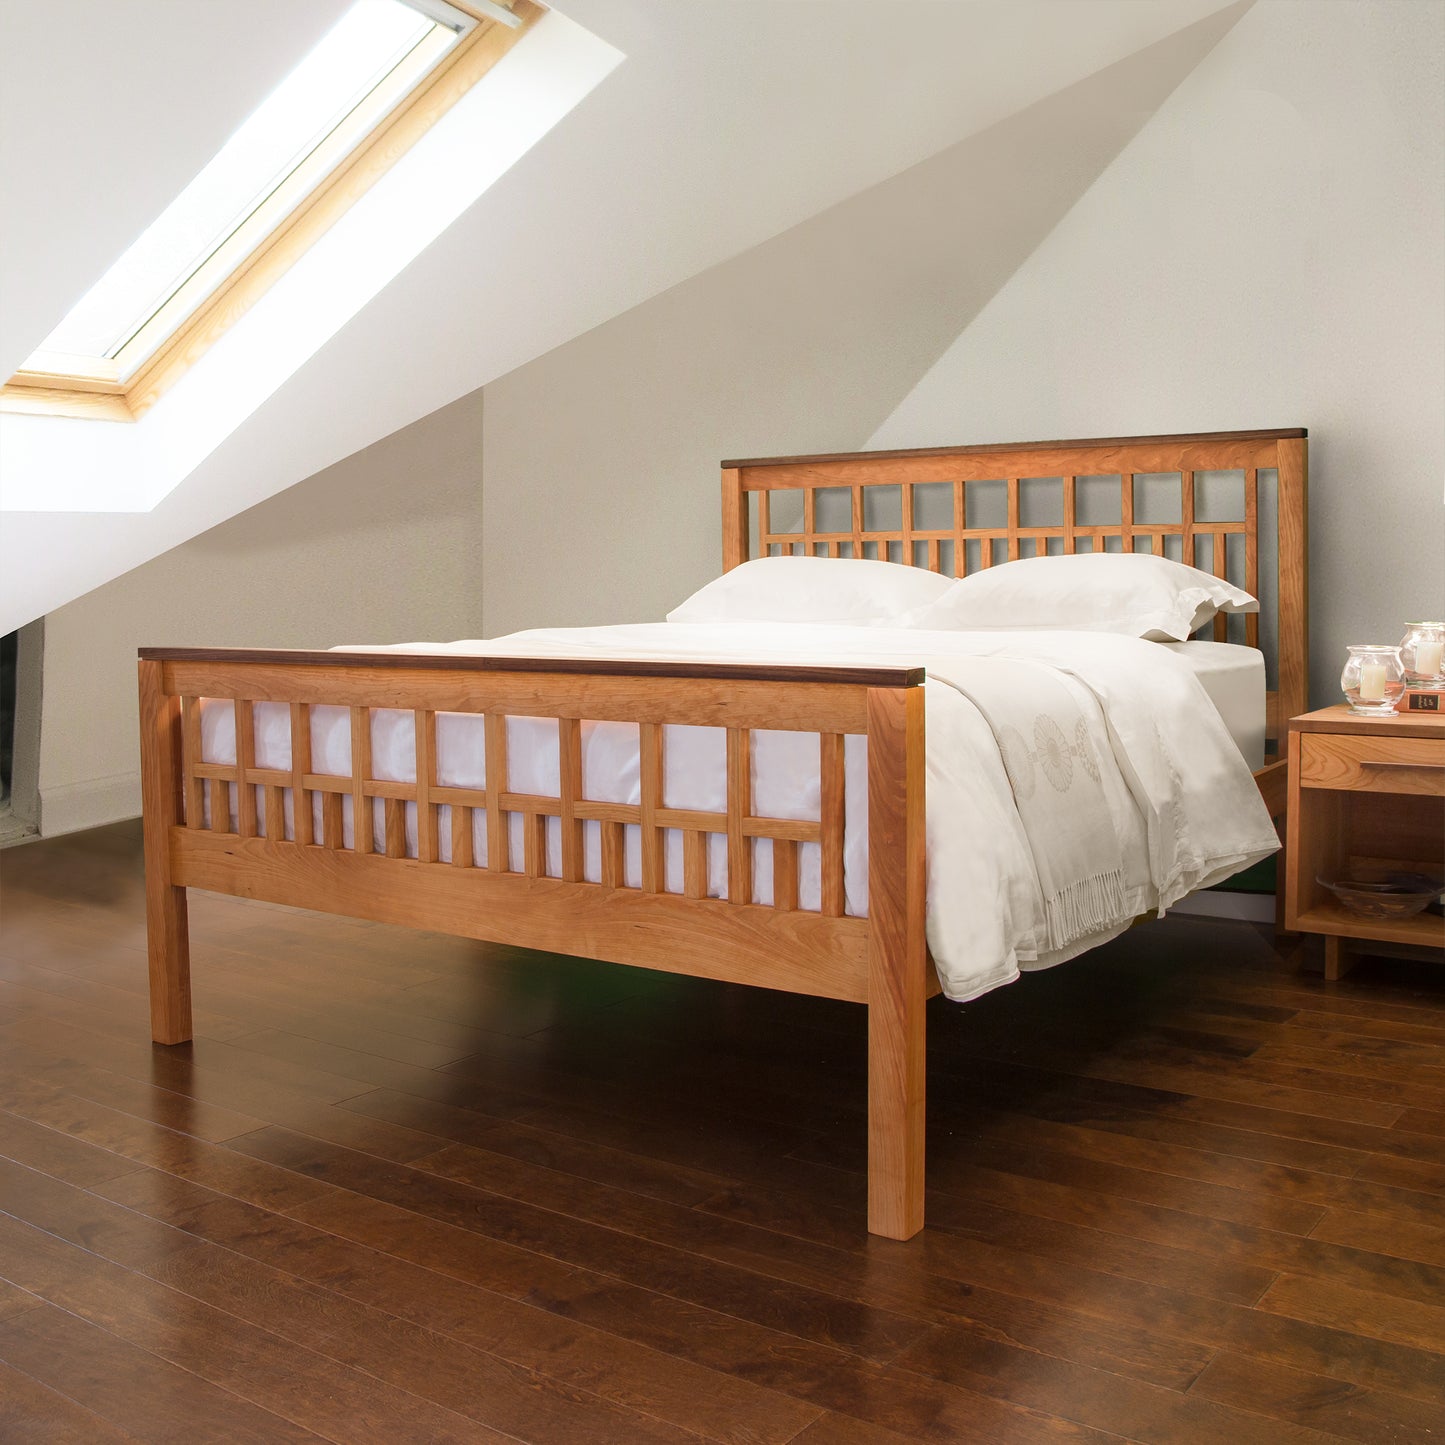 A solid hardwoods Vermont Furniture Designs Modern American Trellis Bed frame with white bedding under a sloped ceiling with a skylight in a modern attic bedroom.